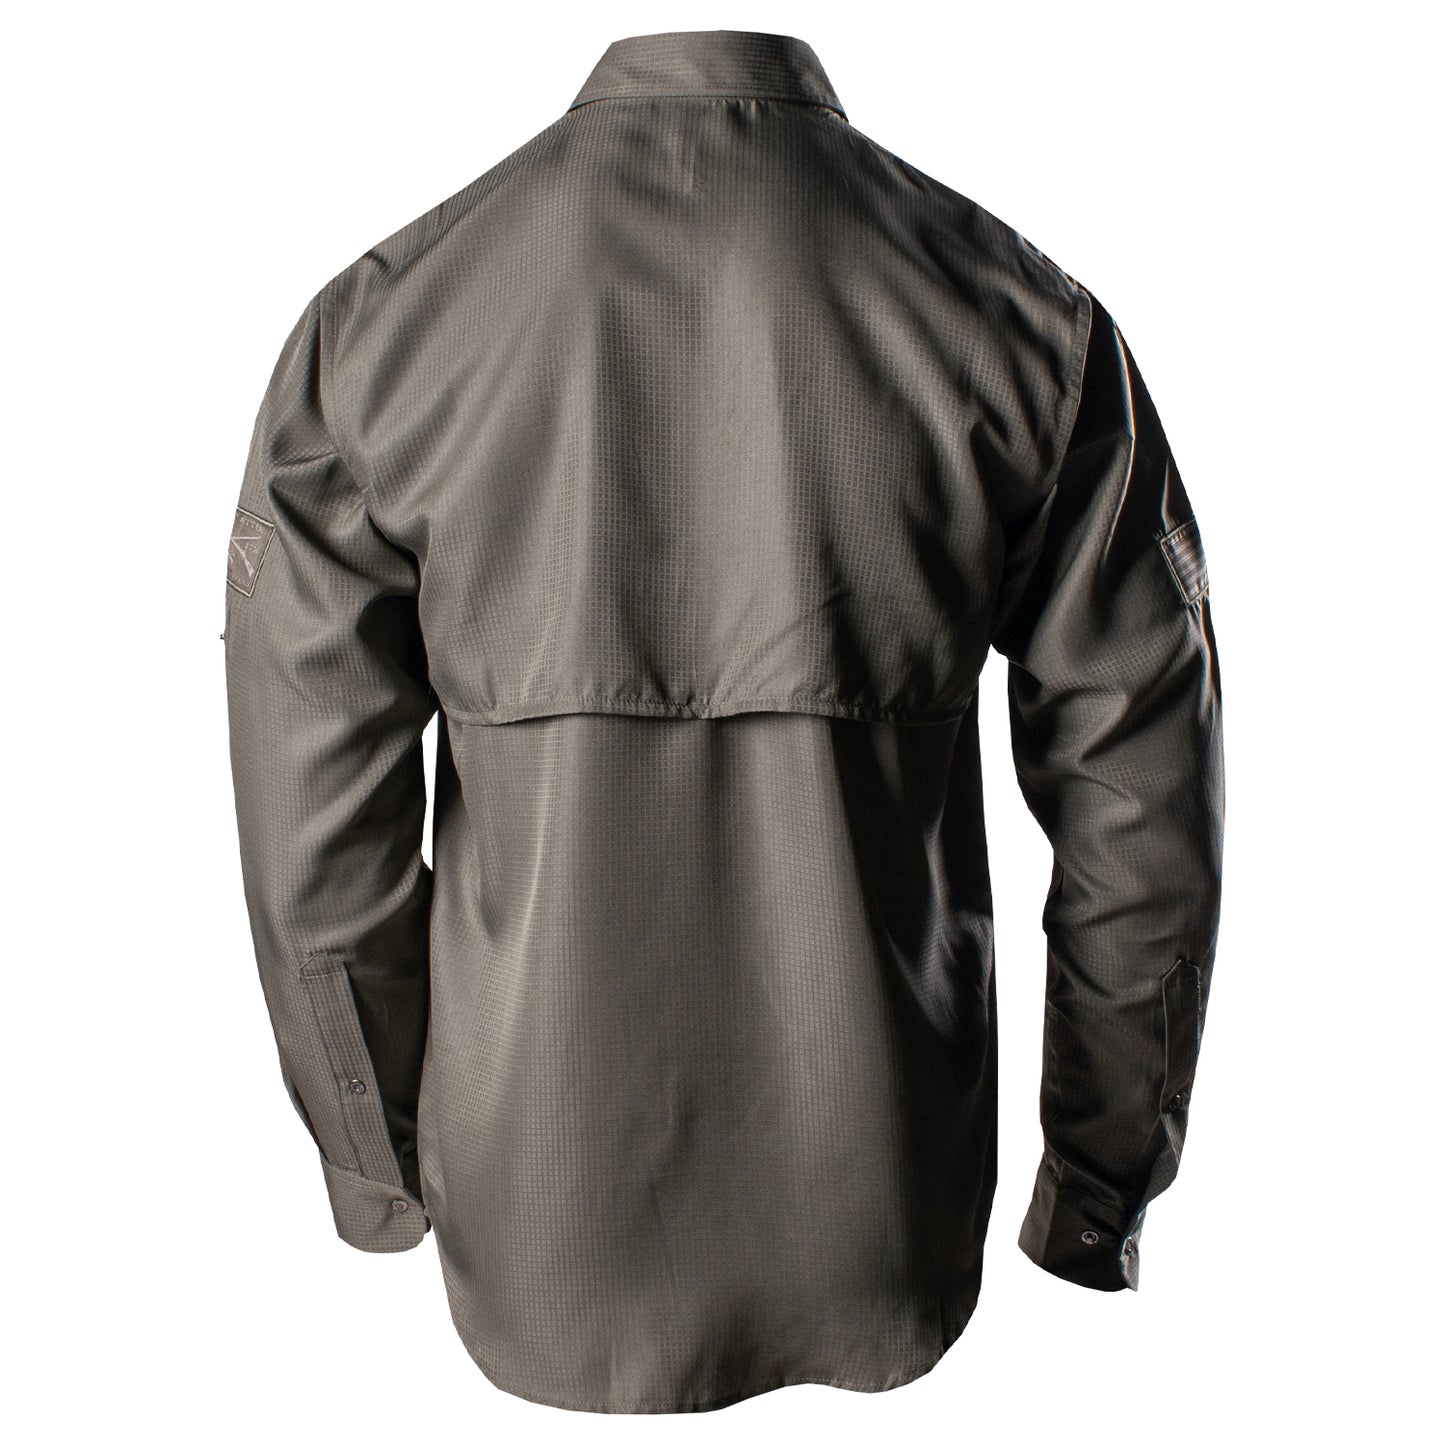 Back of the of the Grunt Style Long Sleeve Fishing Shirt in Olive that shows the vented back panel